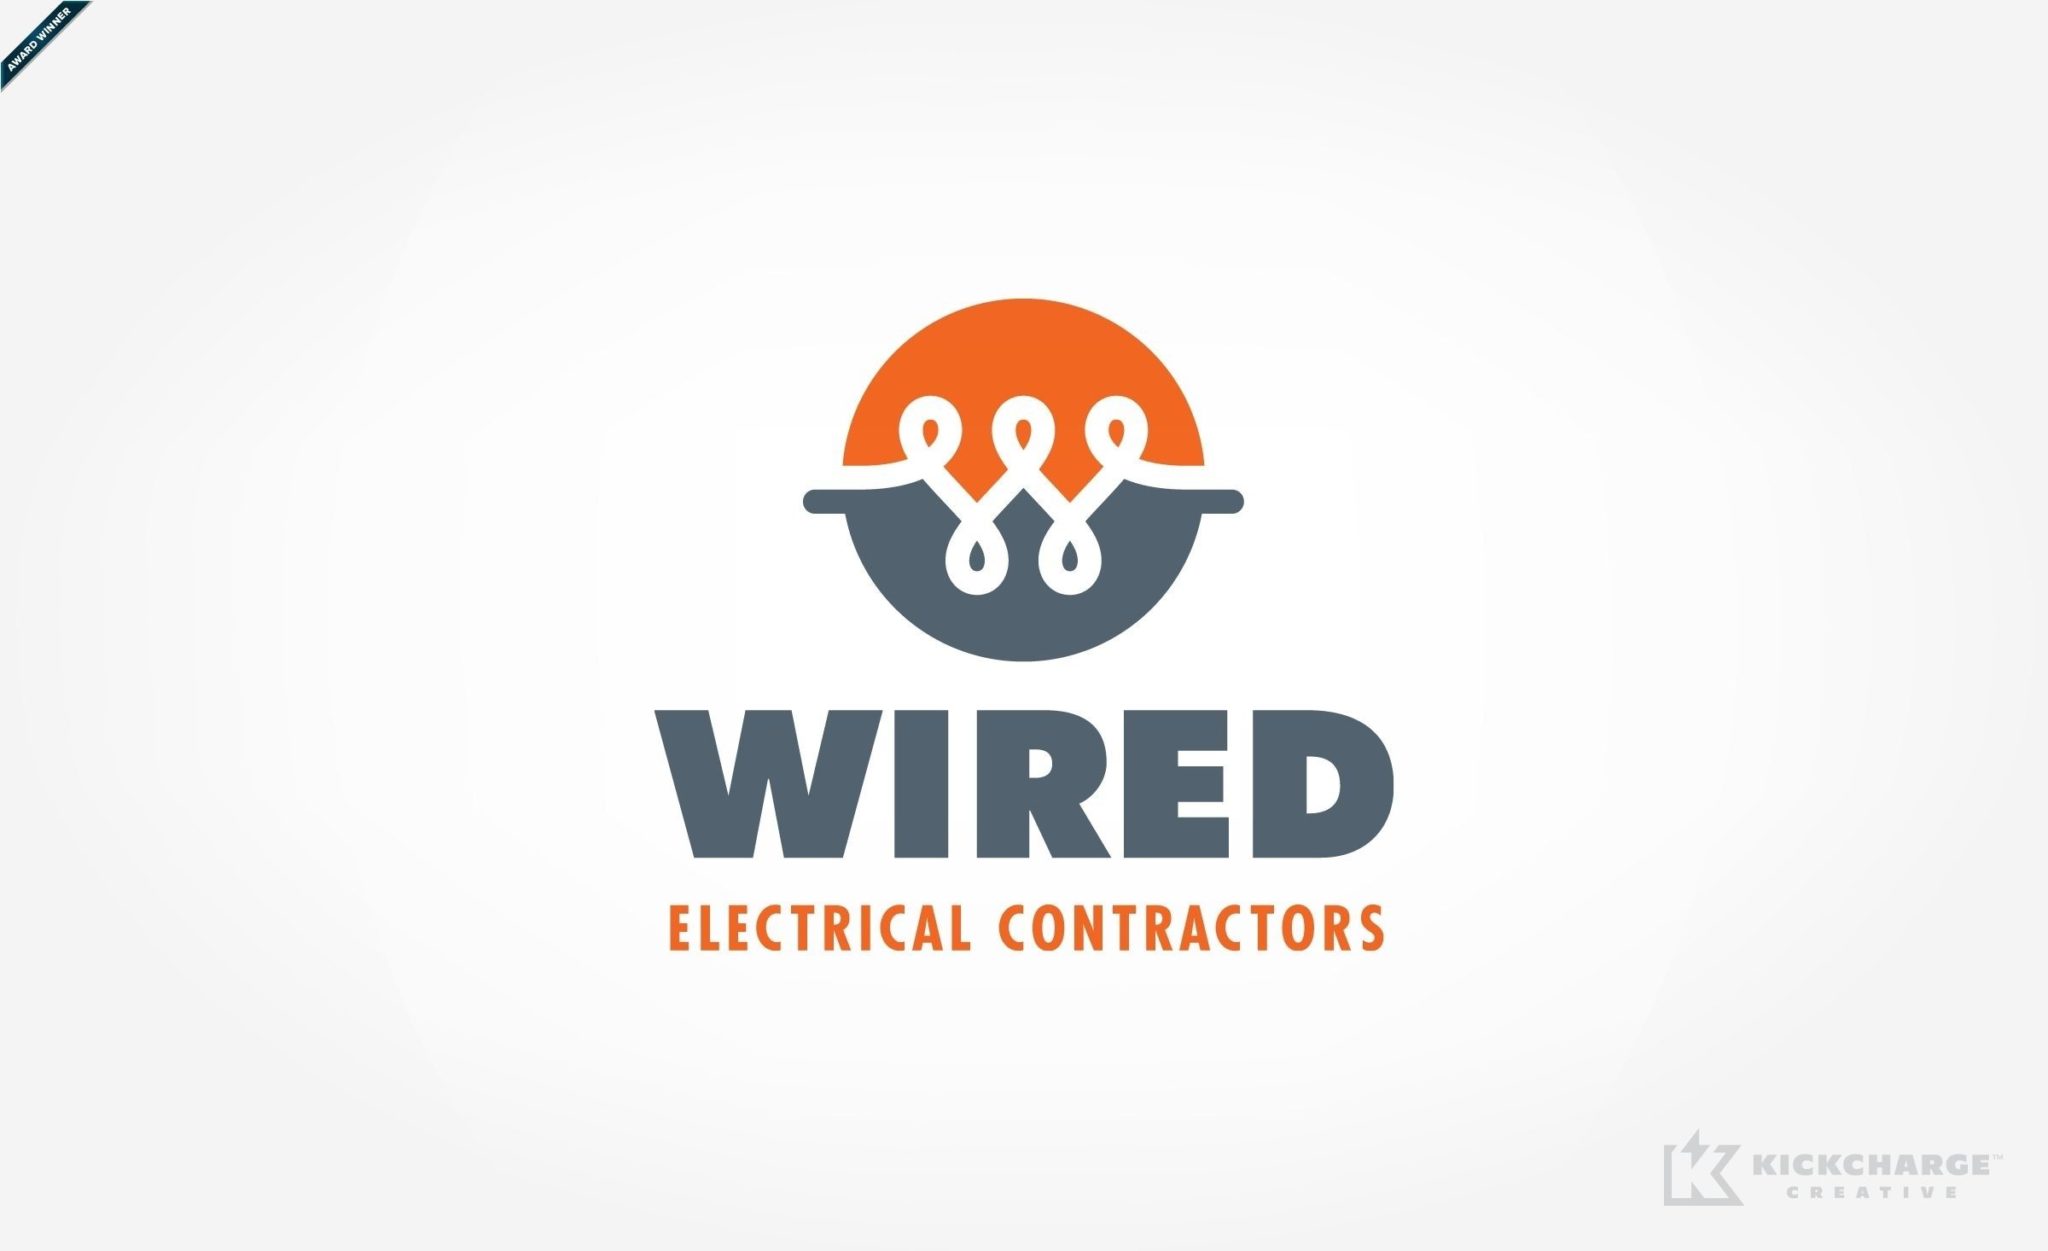 Wired Electrical Contractors